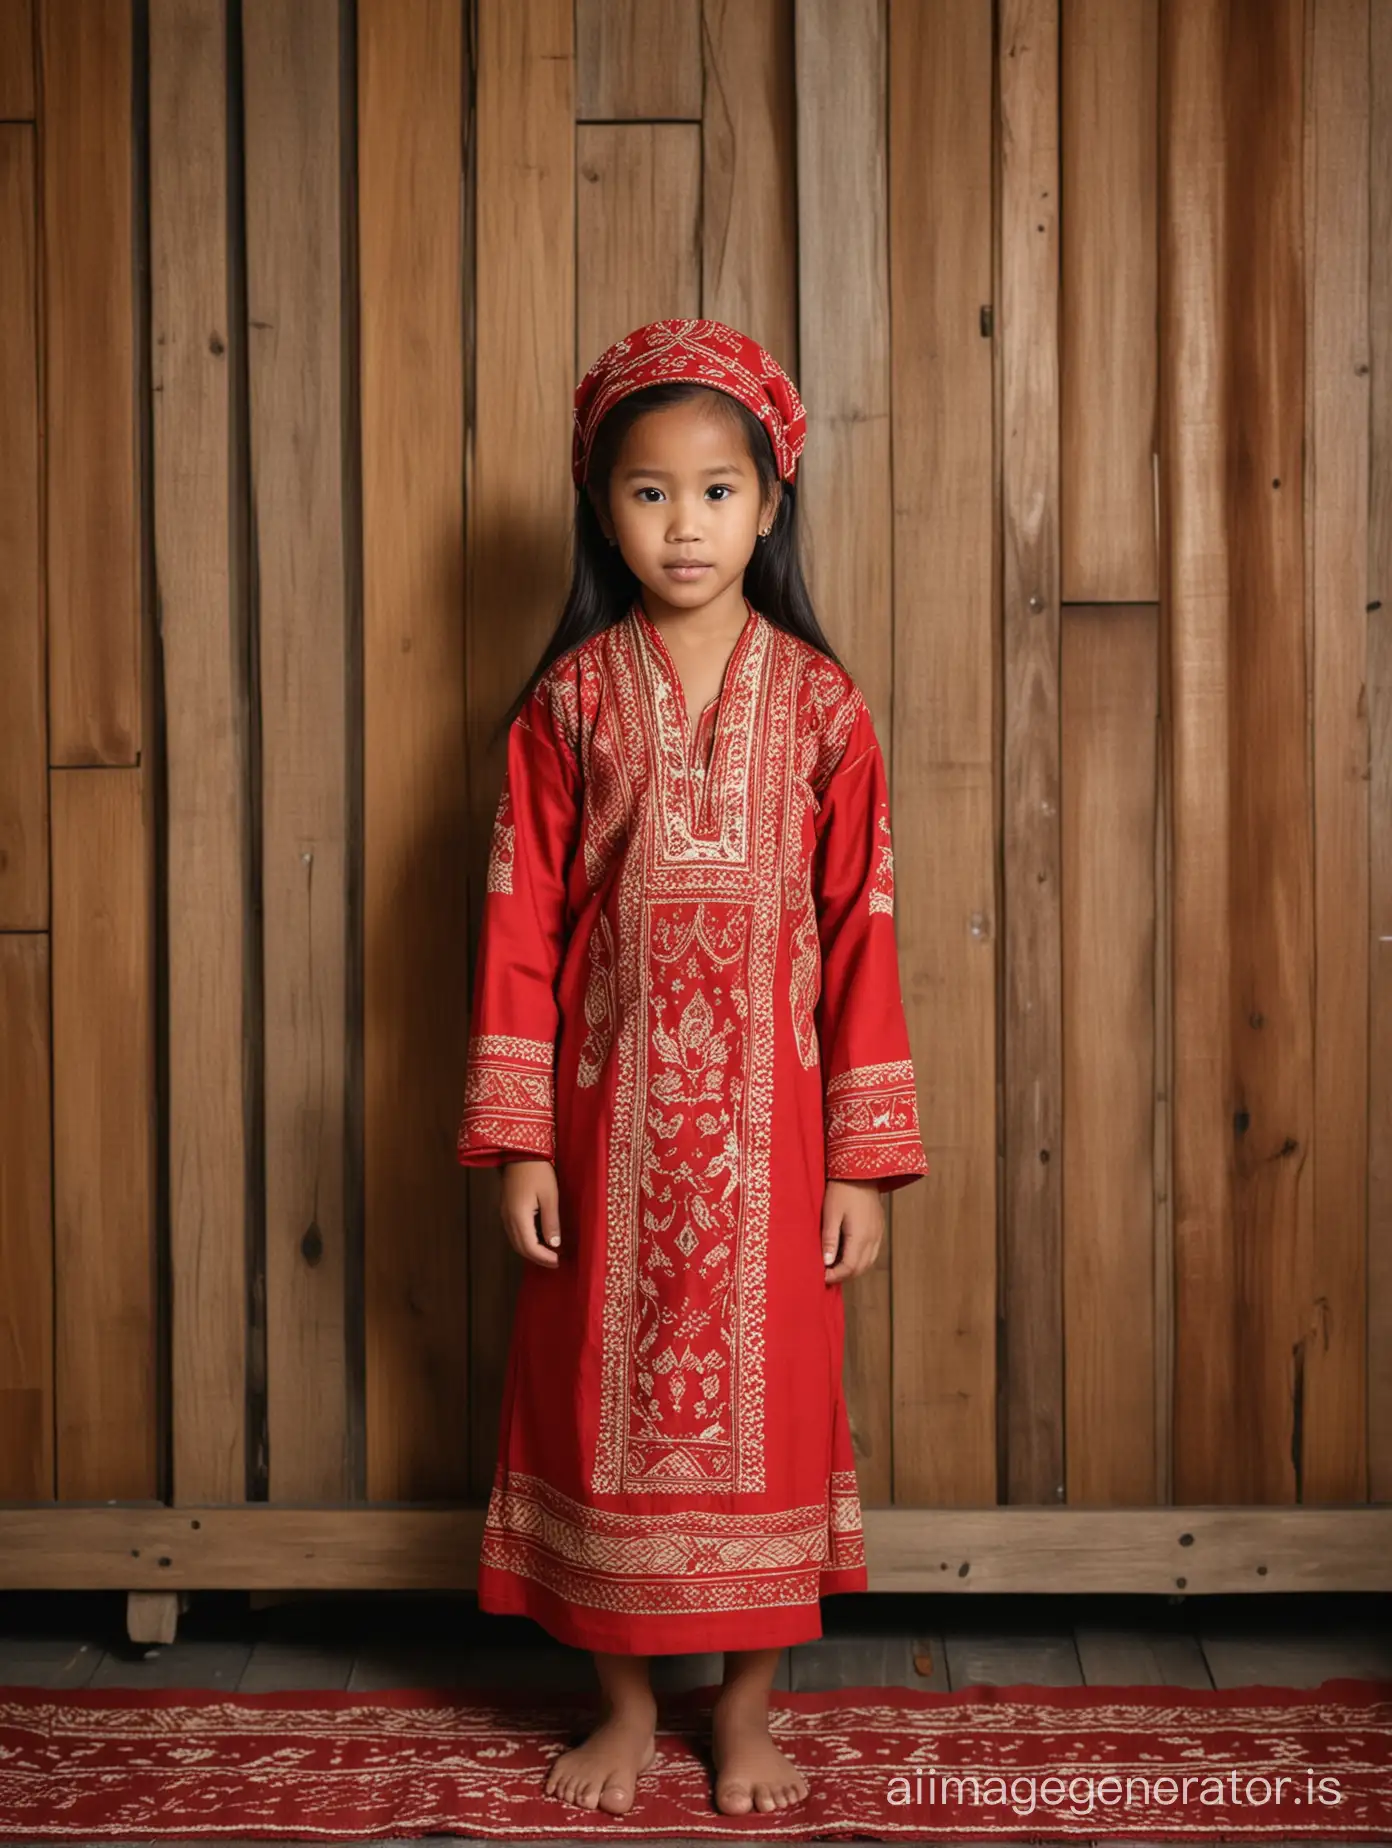 Indonesian-Girl-in-Traditional-Tana-Toraja-Clothing-Cultural-Portrait-in-Wooden-Interior